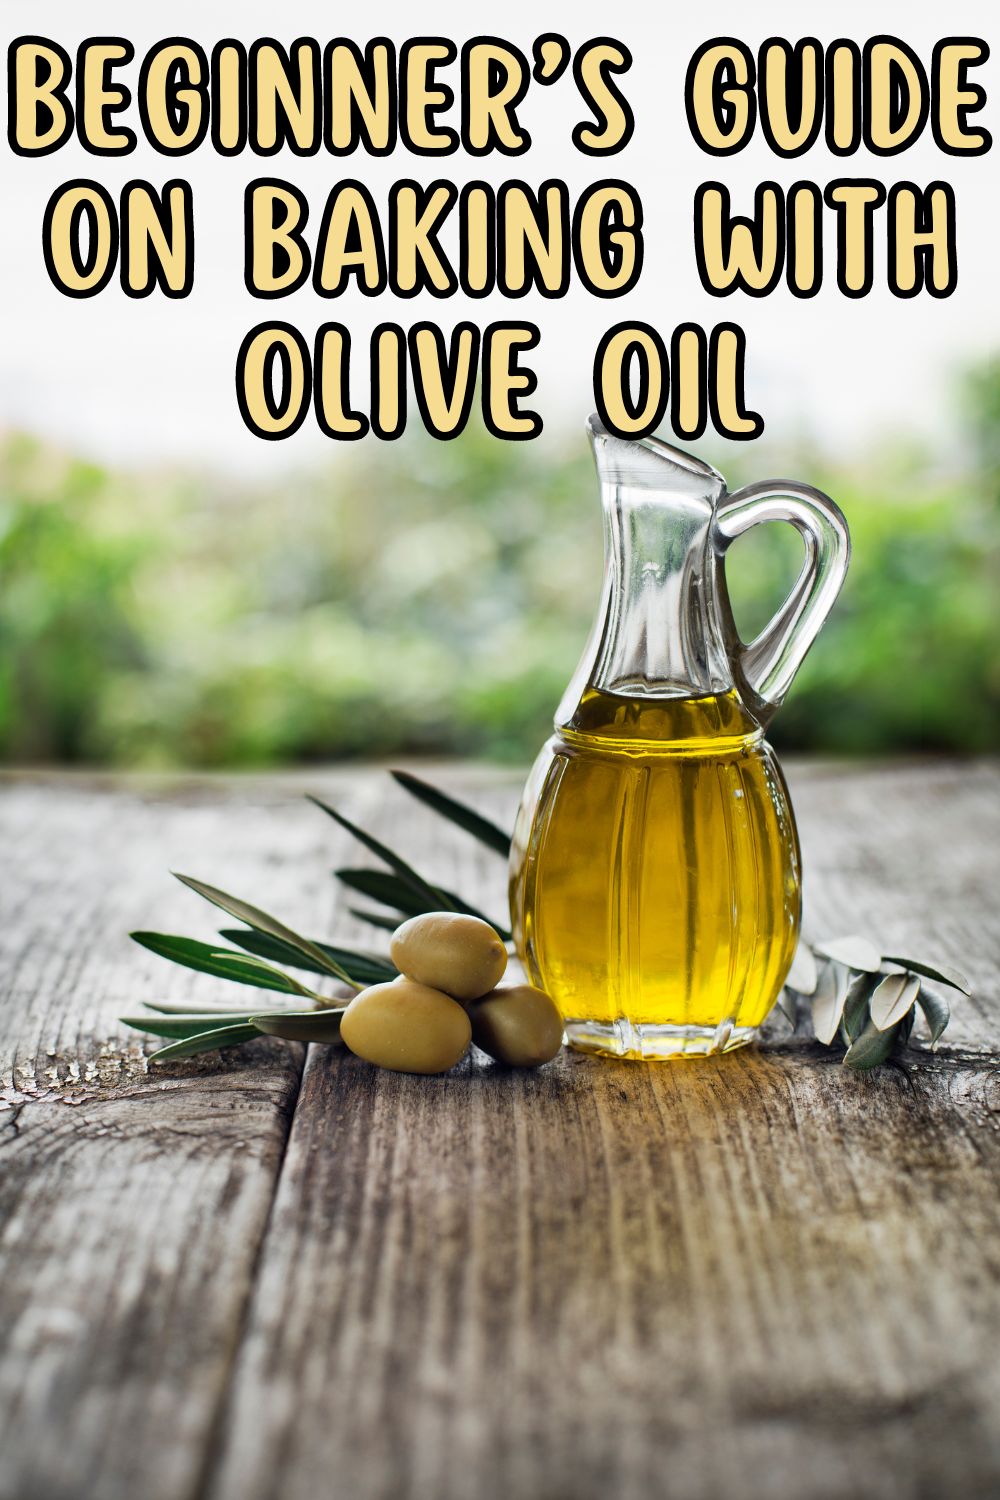 Beginner’s Guide on Baking With Olive Oil.